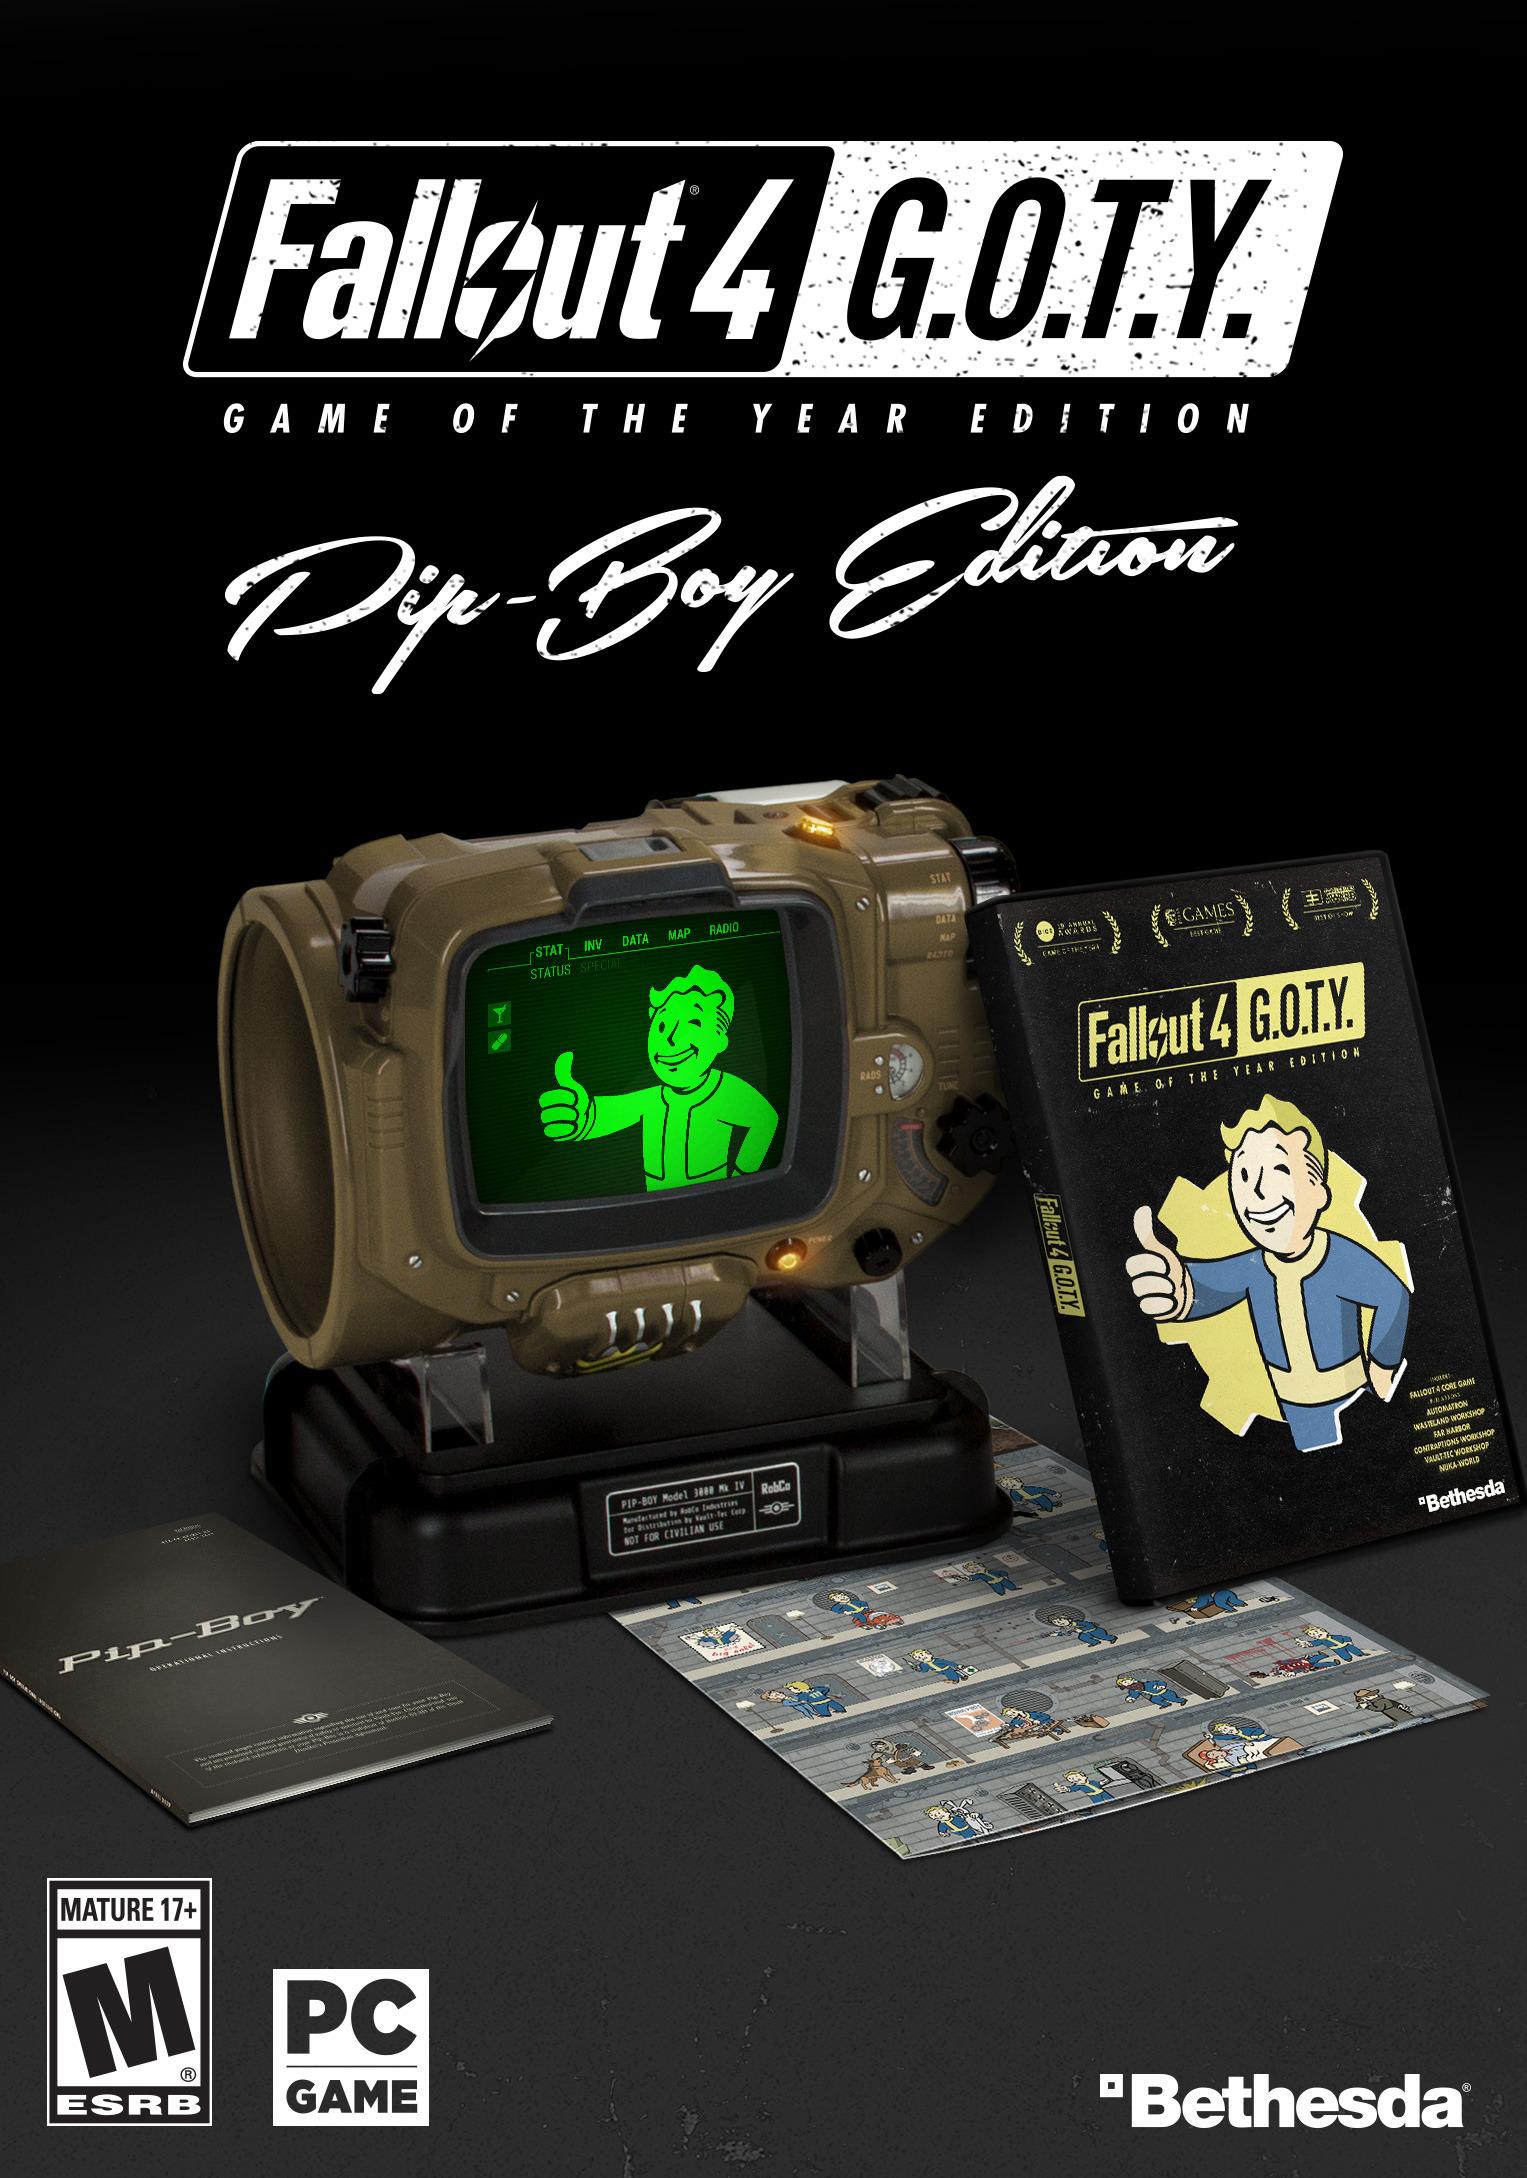 Fallout 4 Game Of The Year Edition Release Date Announced Slashgear